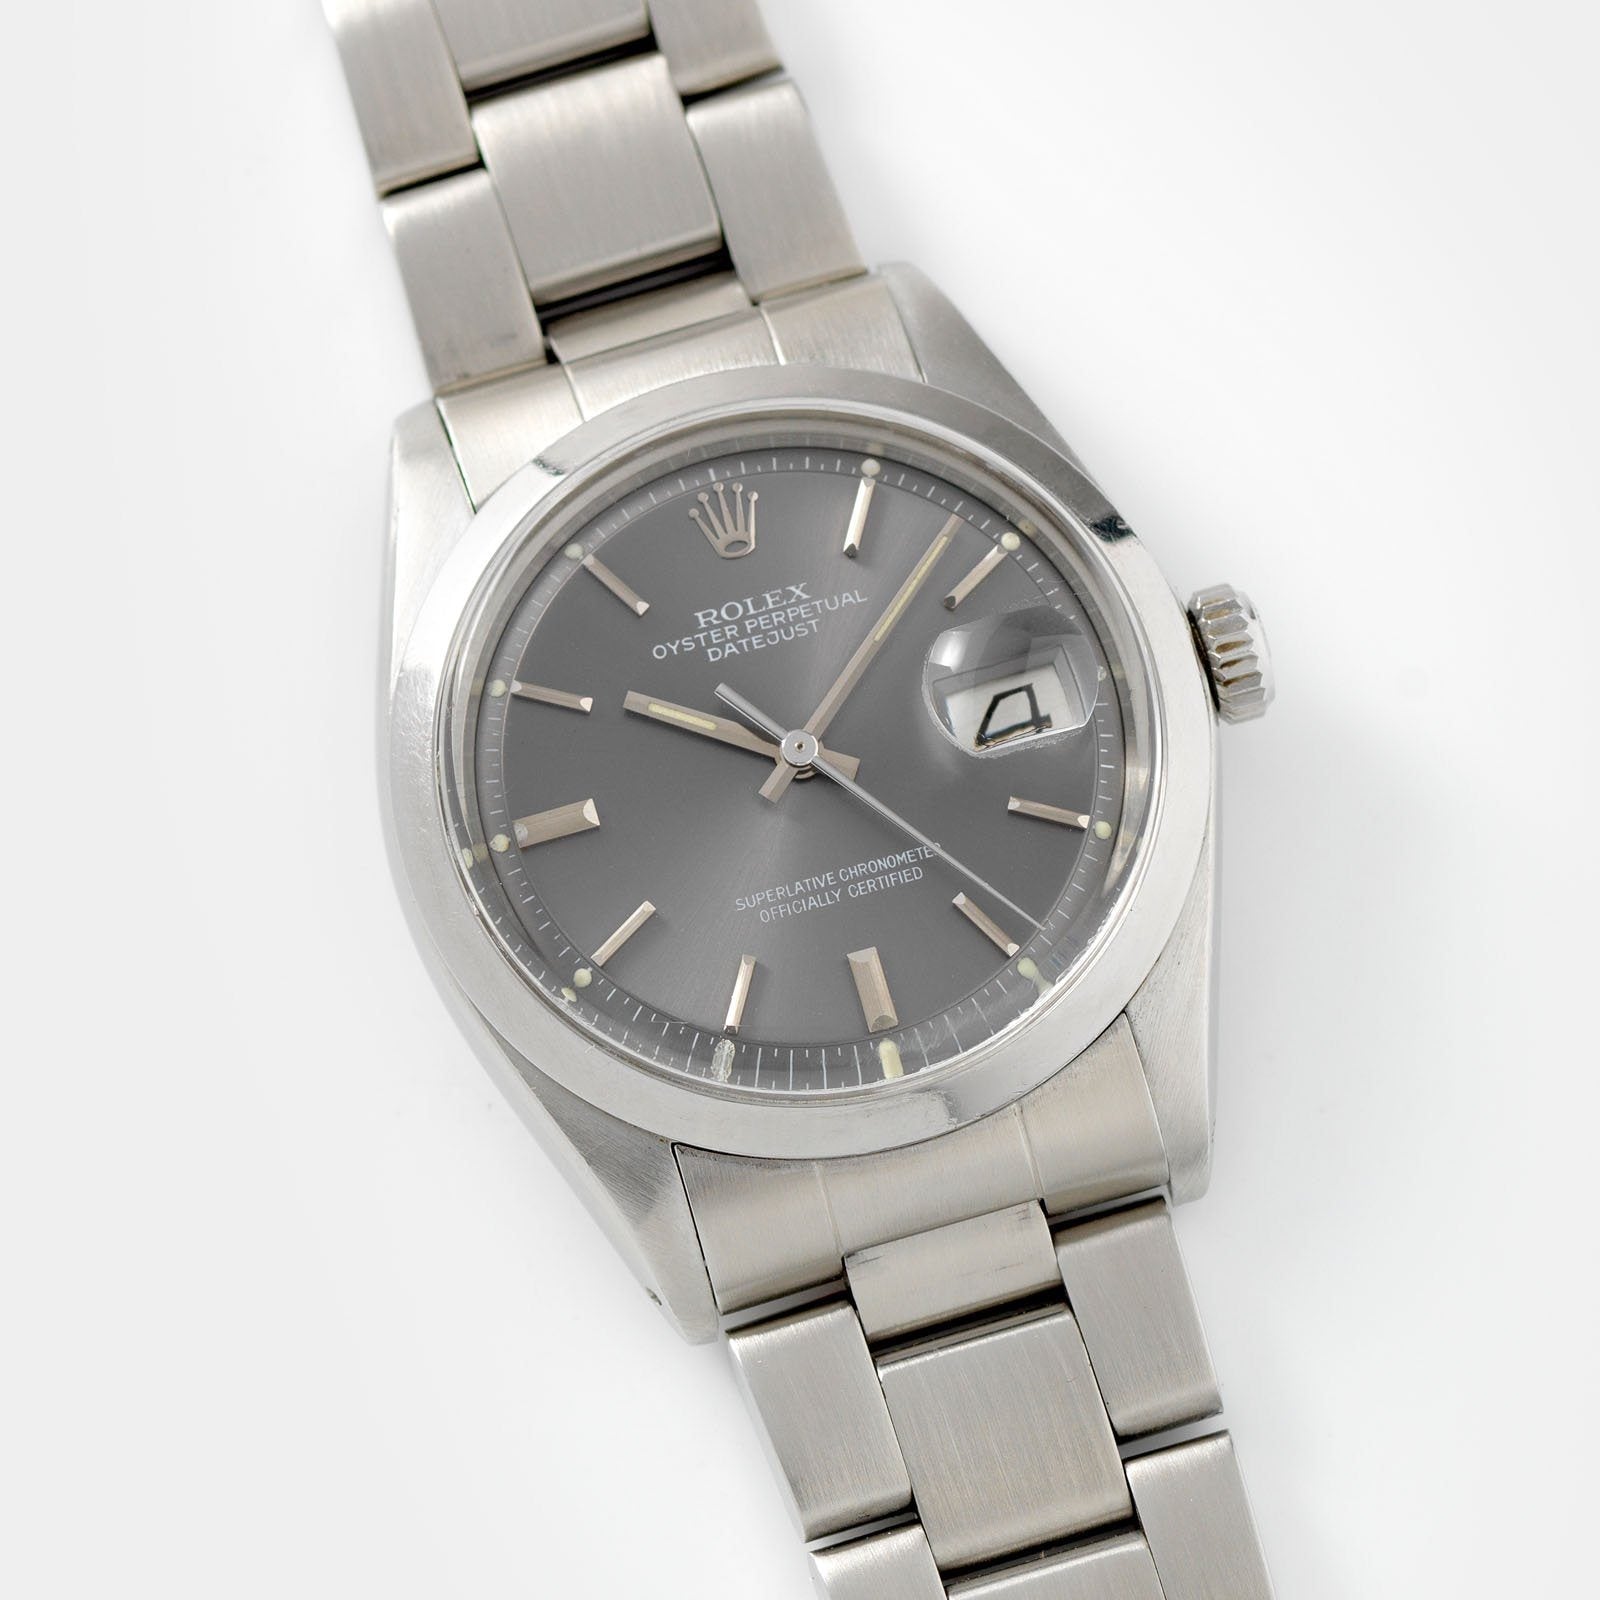 Rolex Datejust Reference 1600 Grey Dial